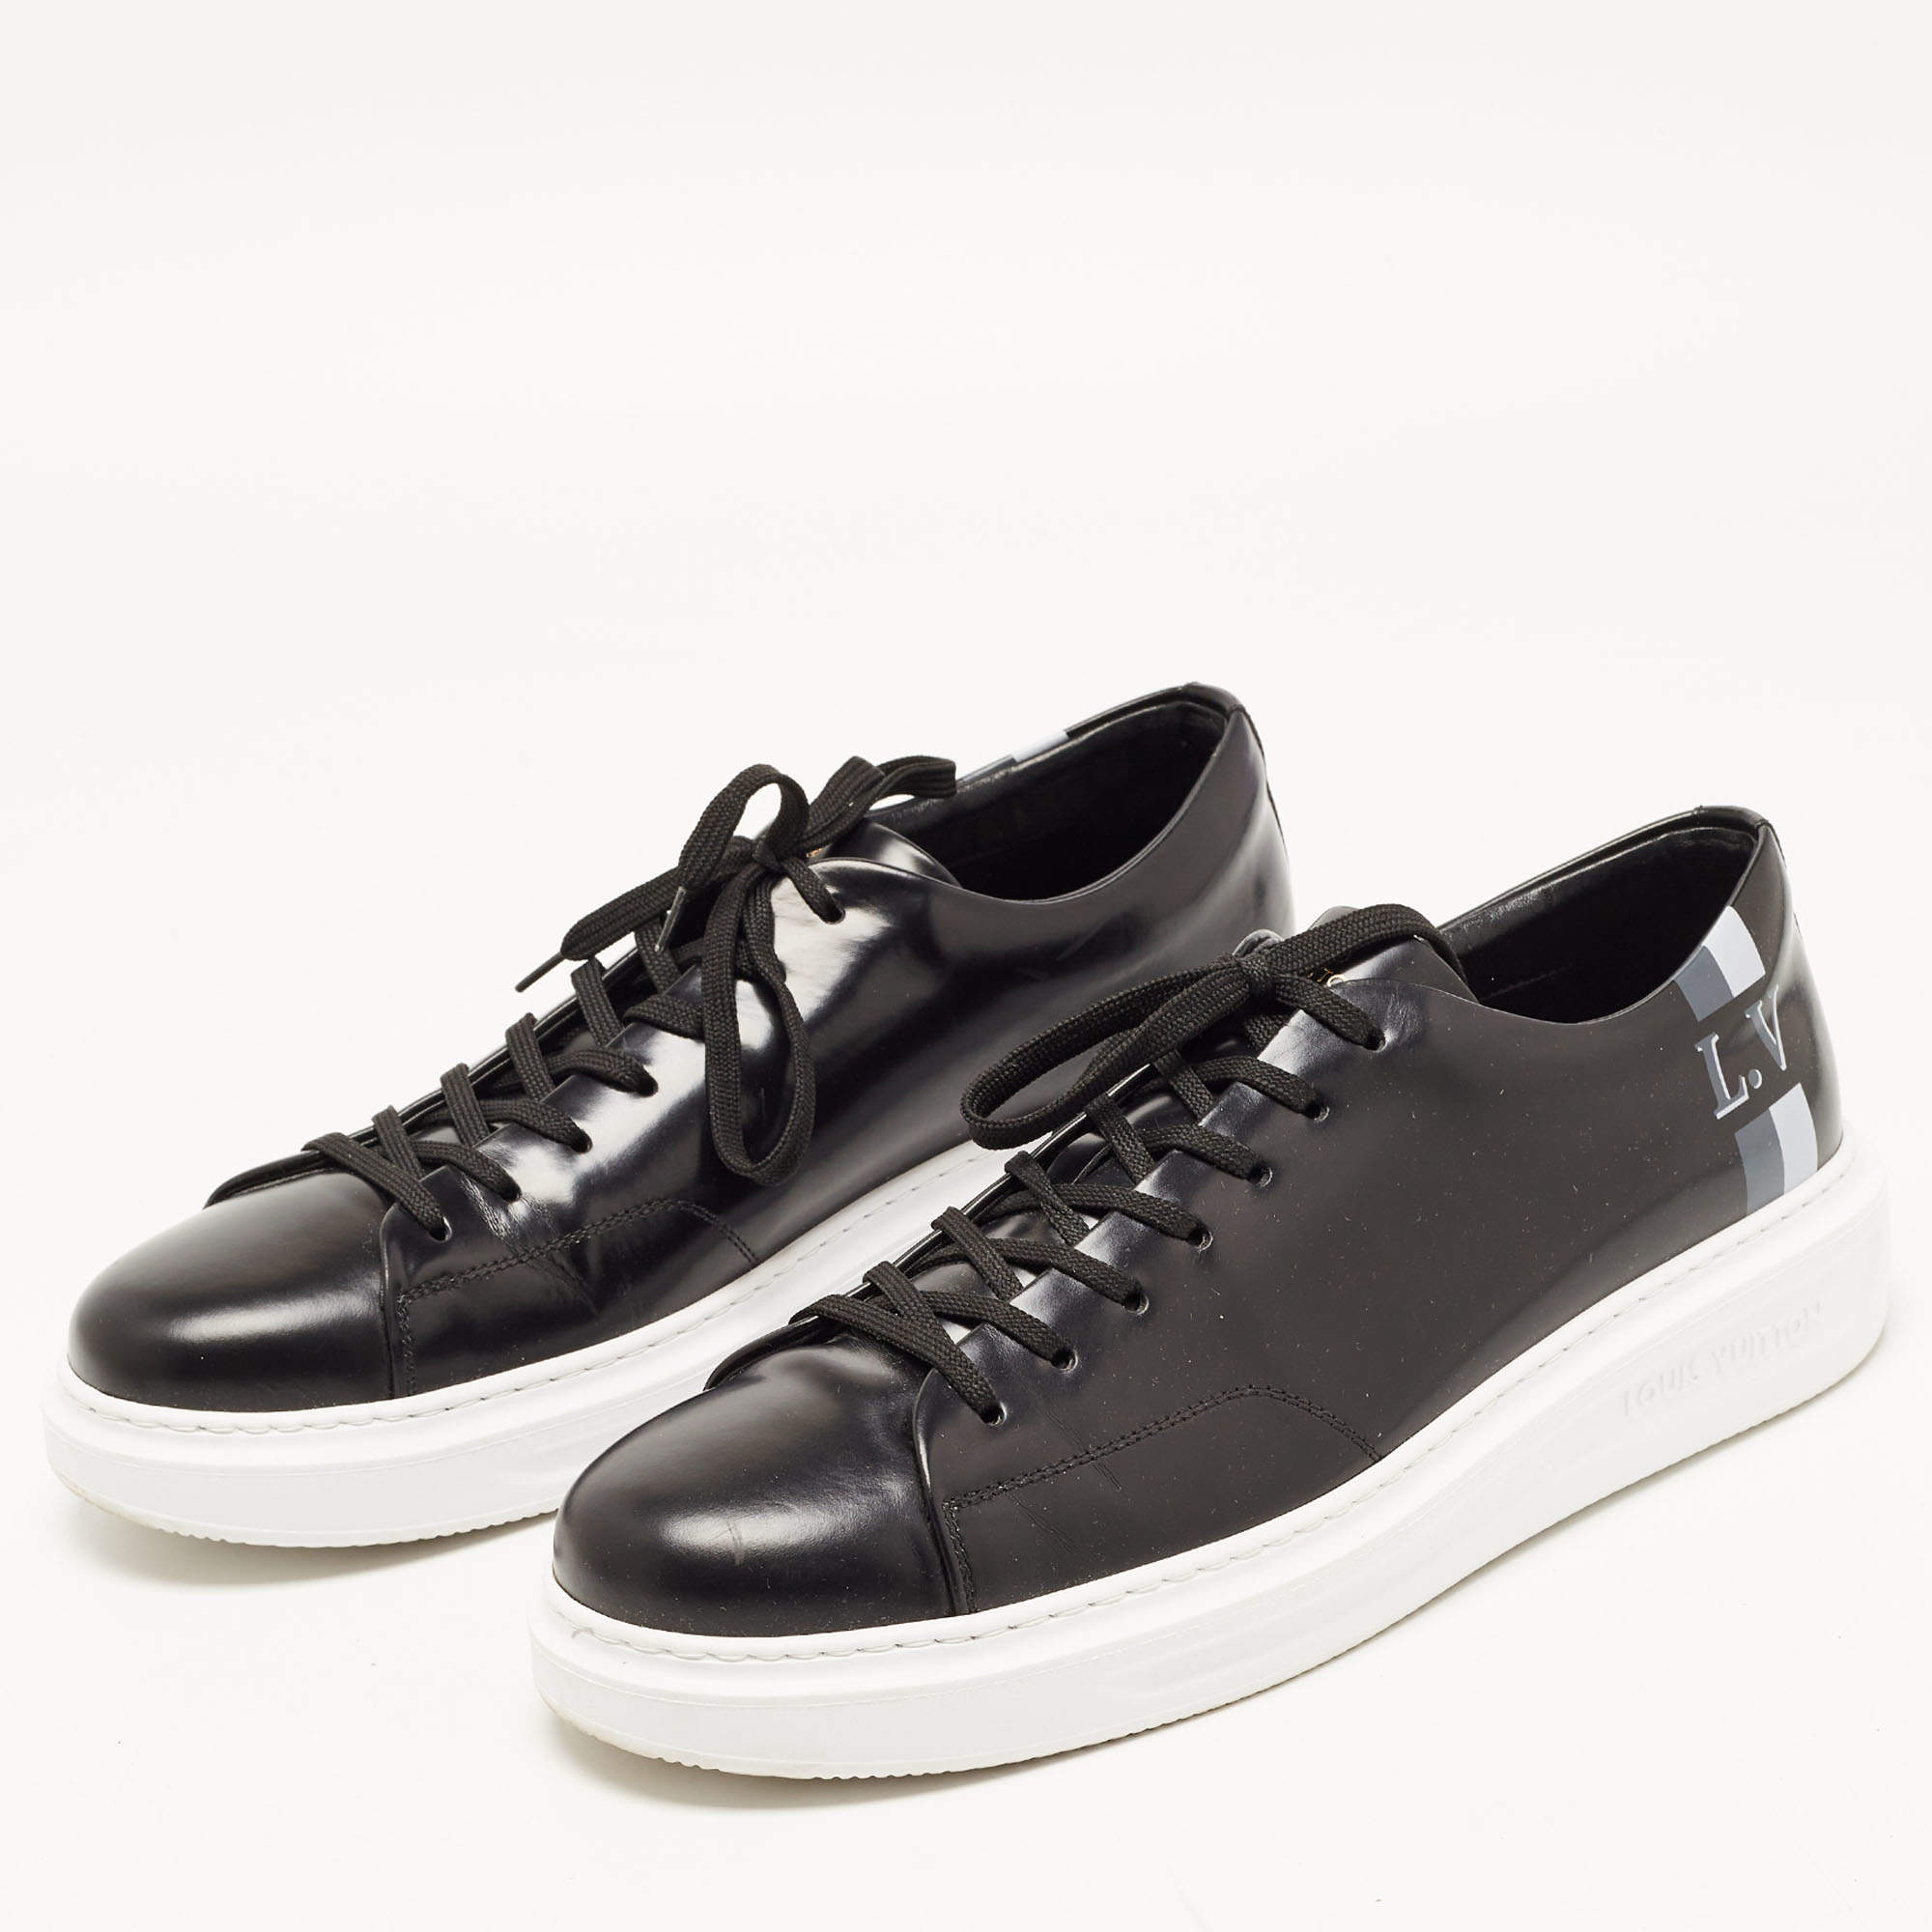 Louis Vuitton - Authenticated Beverly Hills Trainer - Leather Black For Man, Never Worn